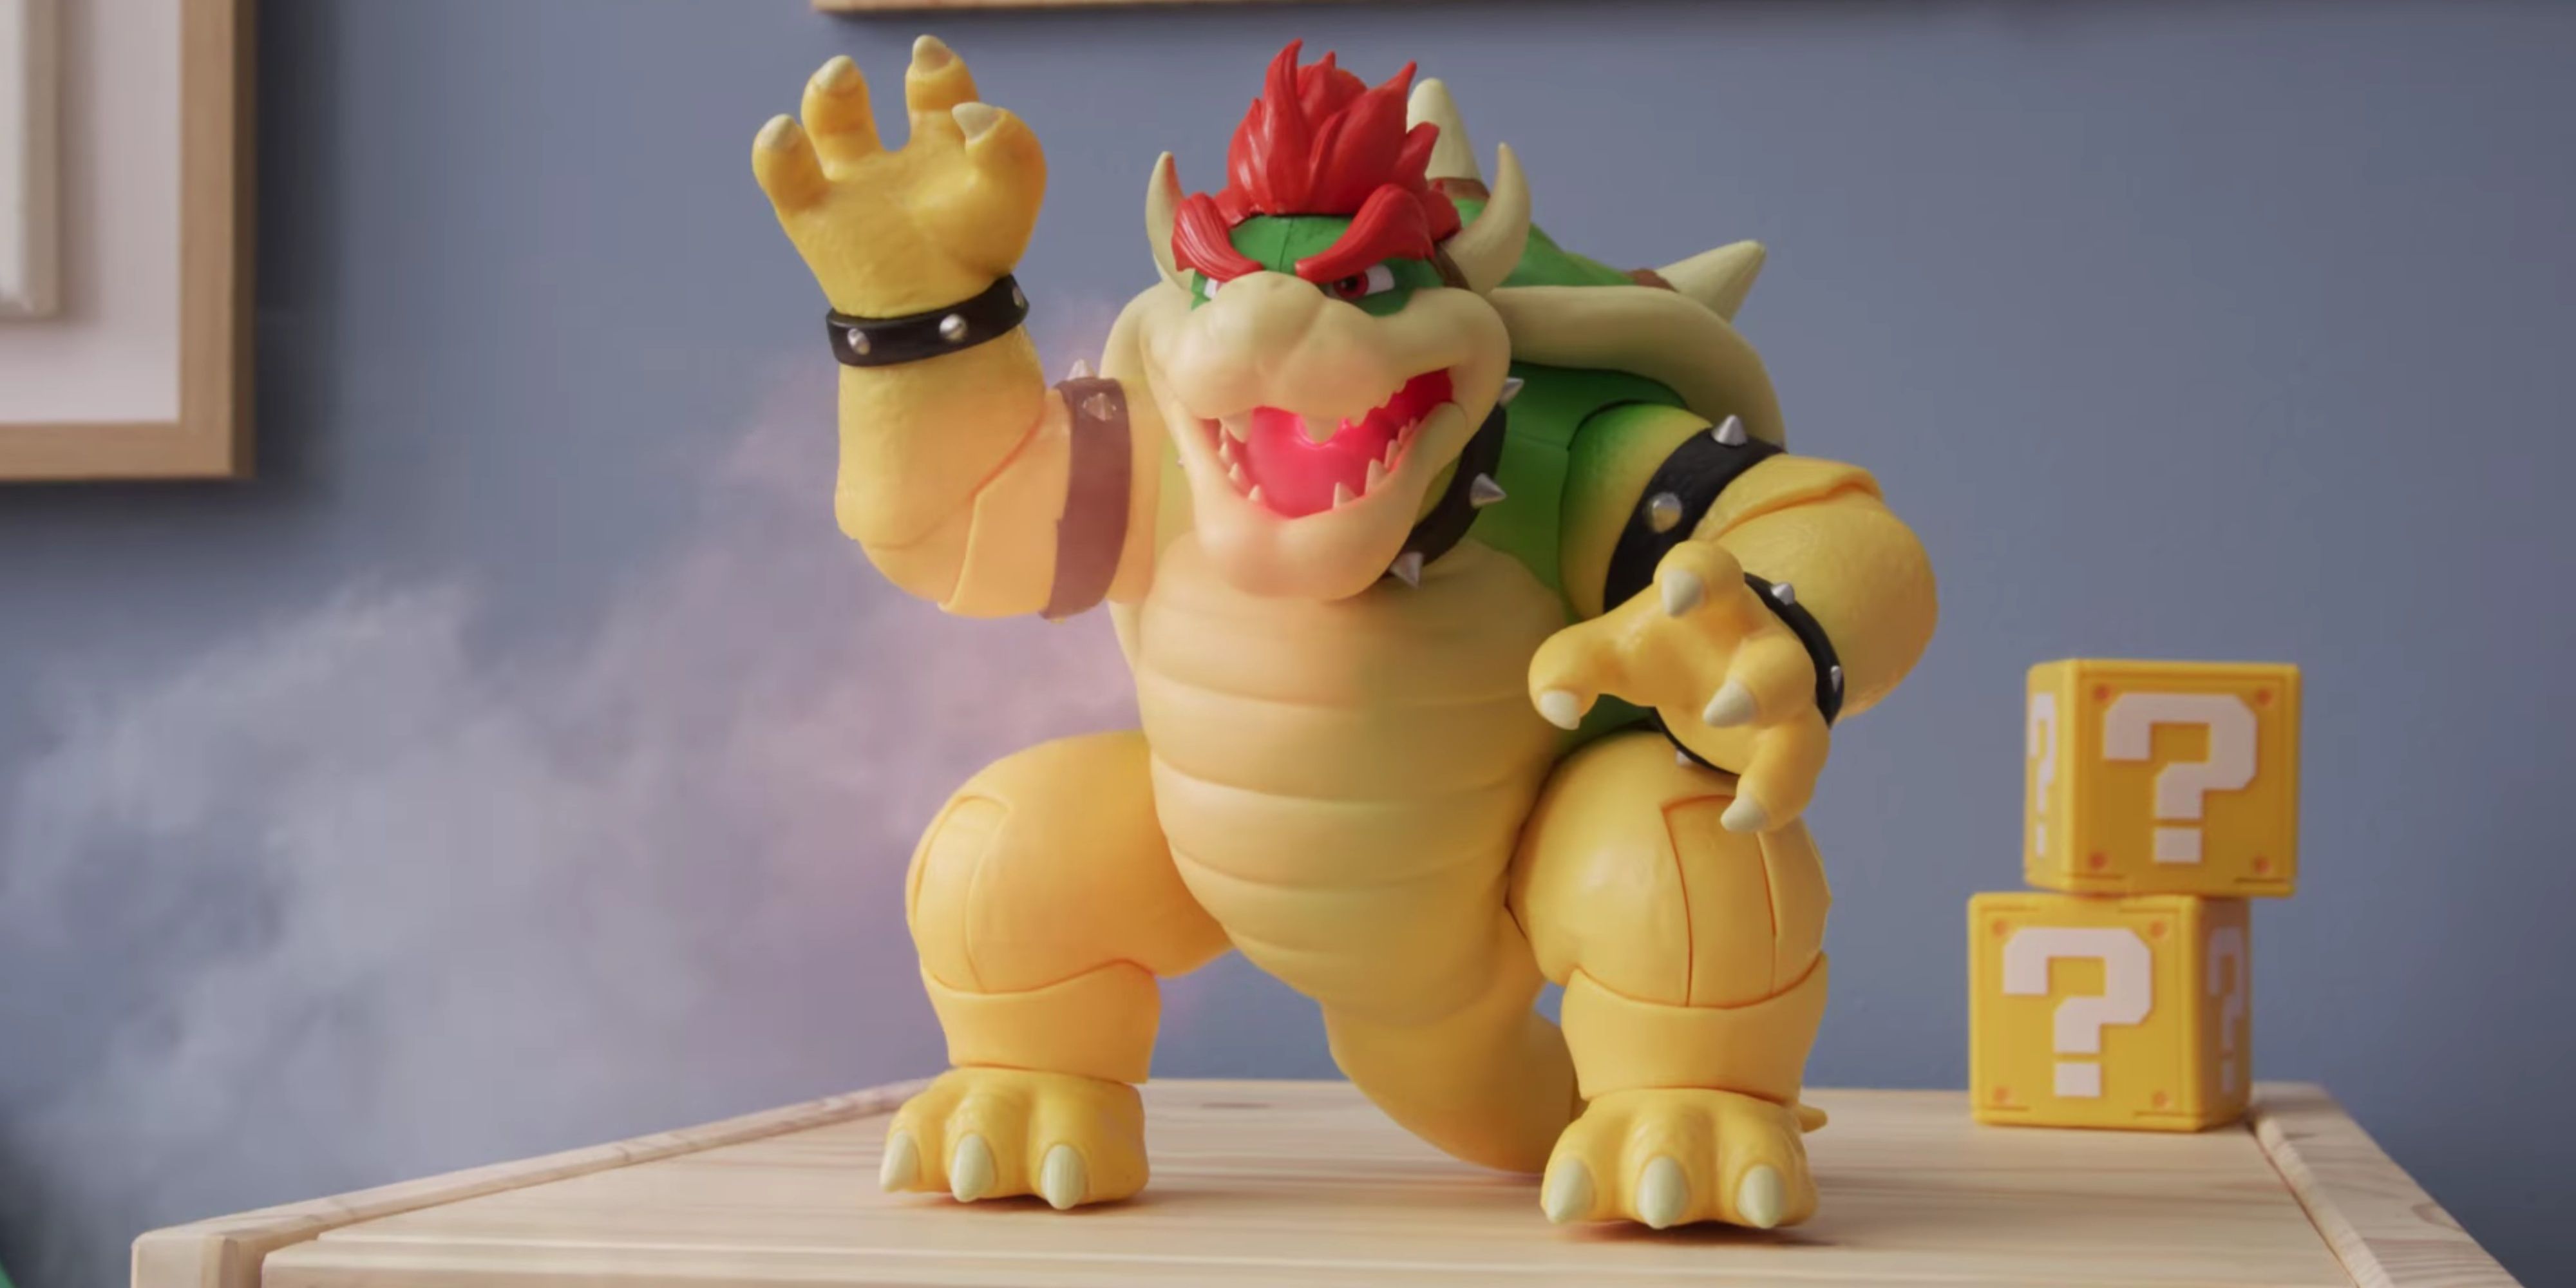 fire breathing mario movie bowser action figure